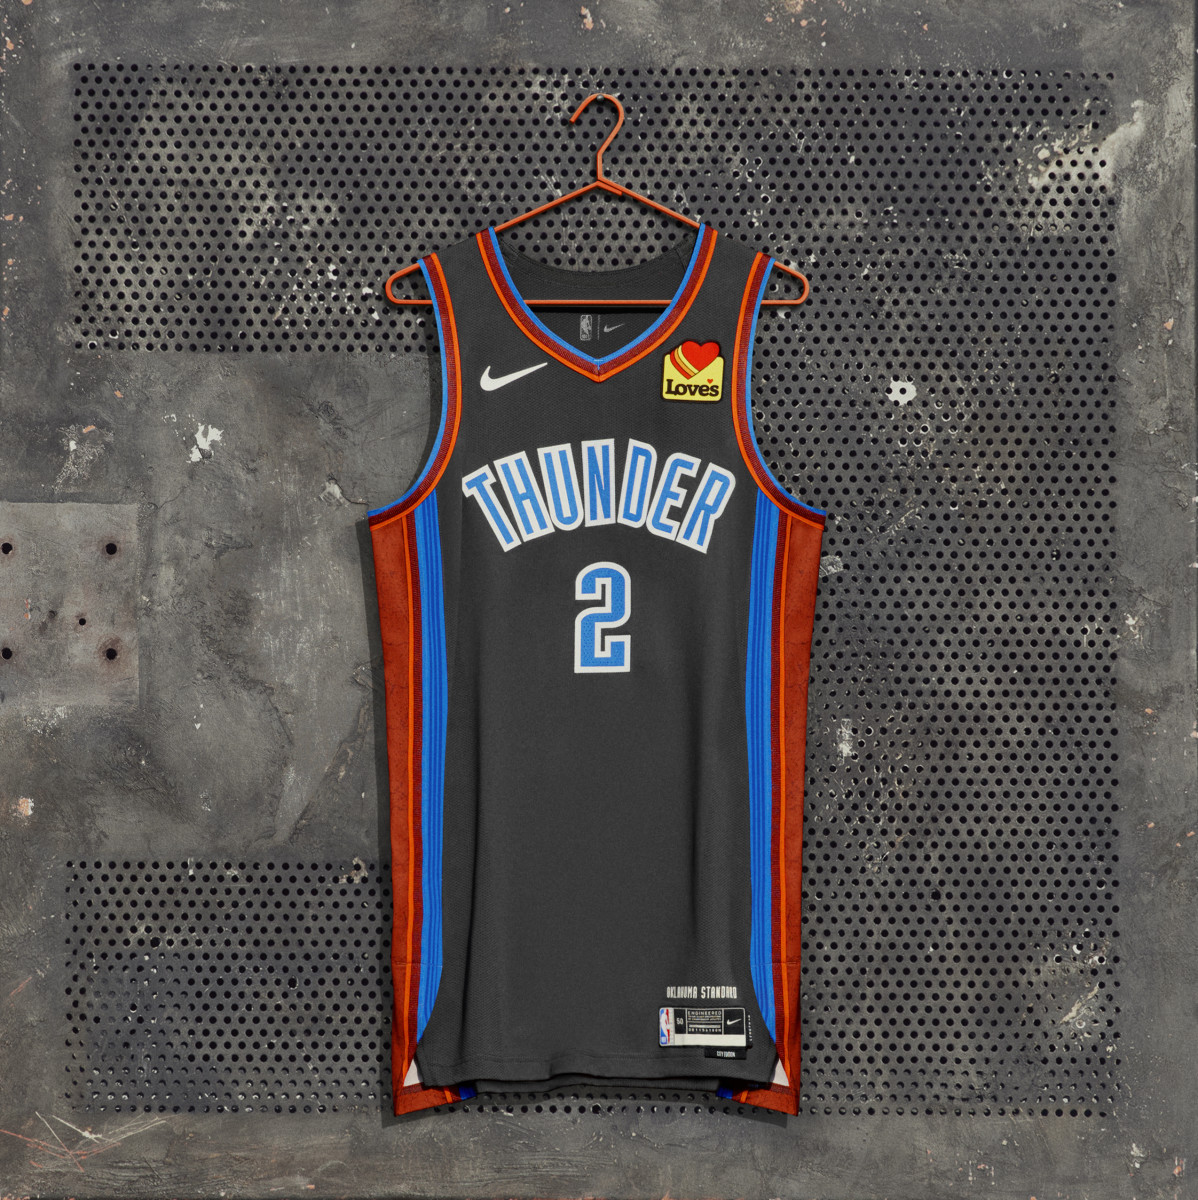 new orleans pelicans city jersey 2023